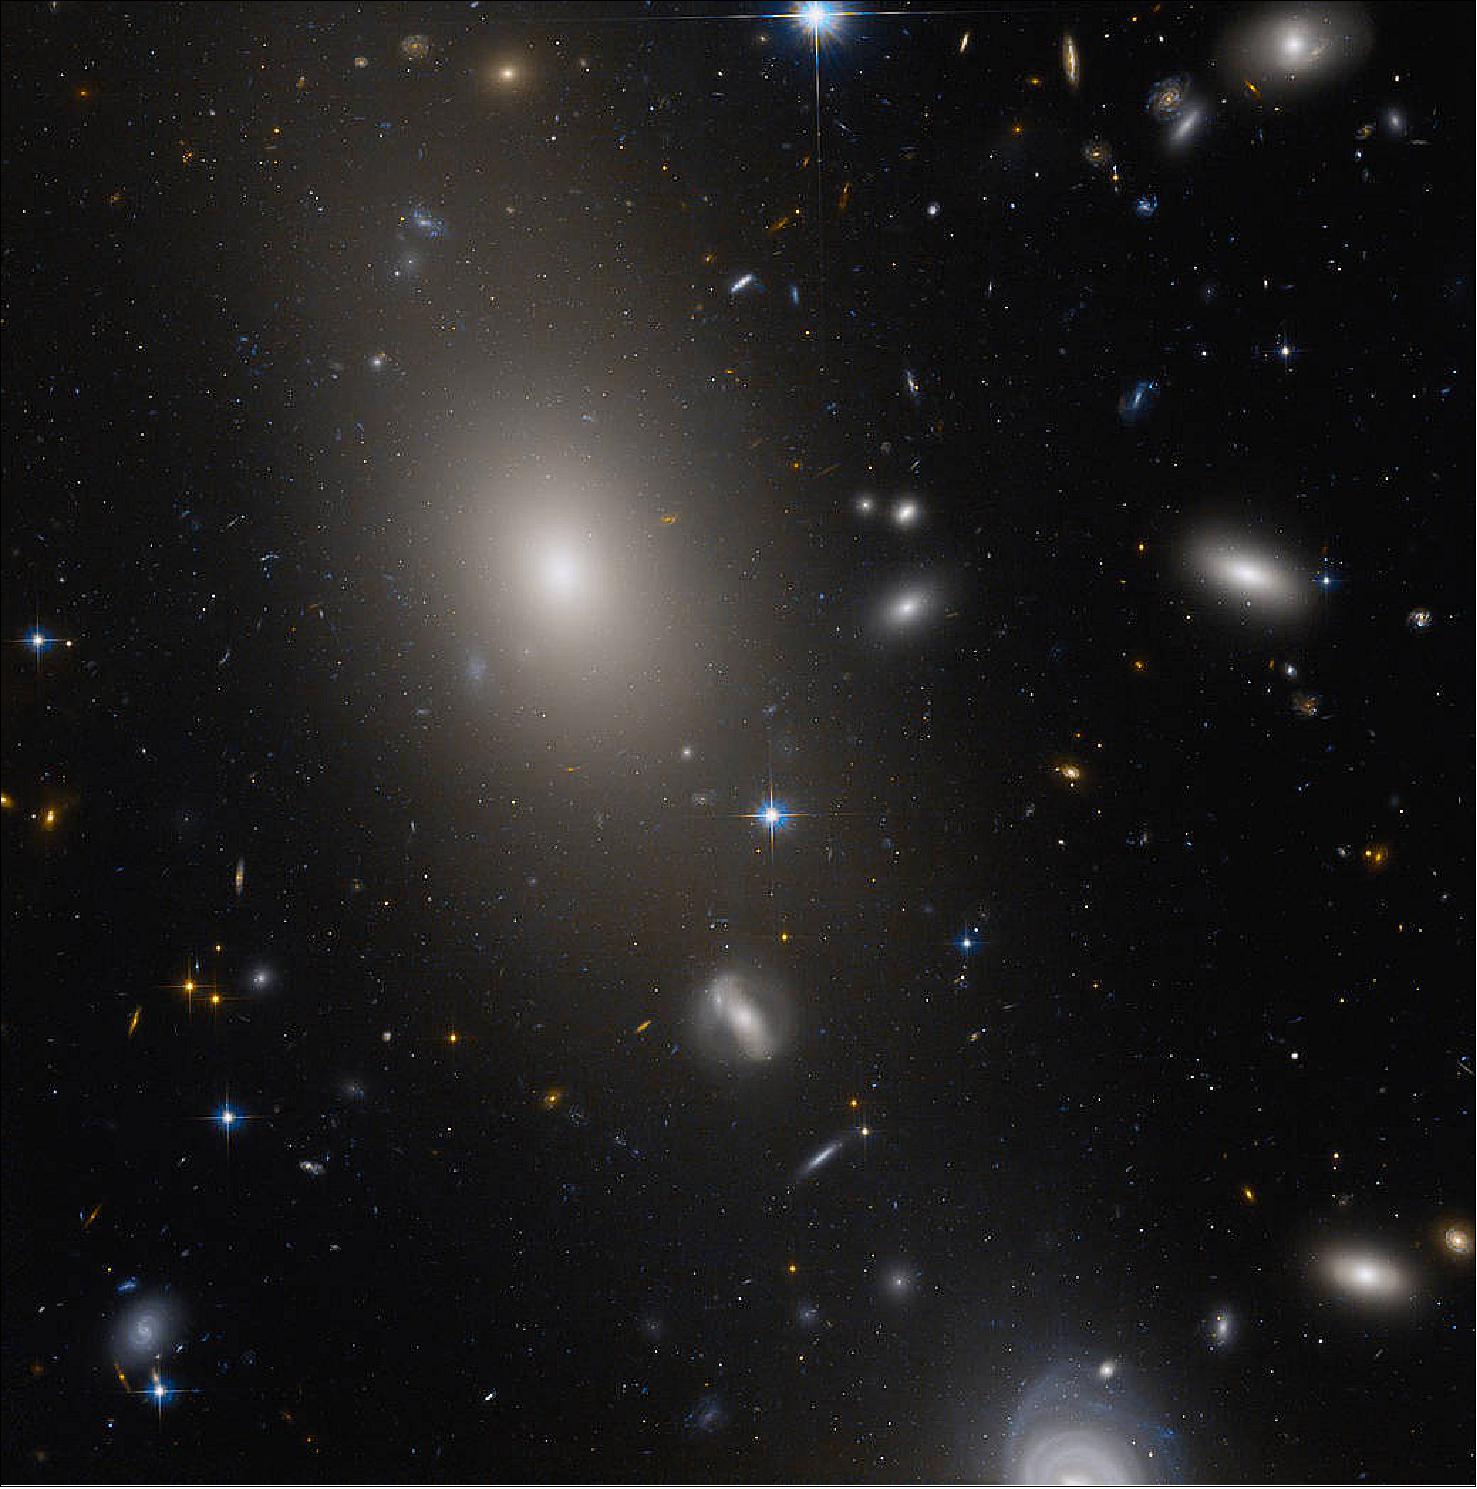 Figure 40: This image of UGC 10143 is part of a Hubble survey of globular star clusters associated with the brightest galaxies in galaxy clusters. Globular star clusters help astronomers trace the origin and evolution of their galactic neighbors. The Hubble survey looked at the distribution, brightness, and metal content of more than 35,000 globular star clusters. The image uses data from Hubble’s Advanced Camera for Surveys. Any gaps were filled by Hubble’s Wide Field and Planetary Camera 2 and the Pan-STARRS collaboration. The color blue represents visible blue light, and reddish-orange represents near infrared light.